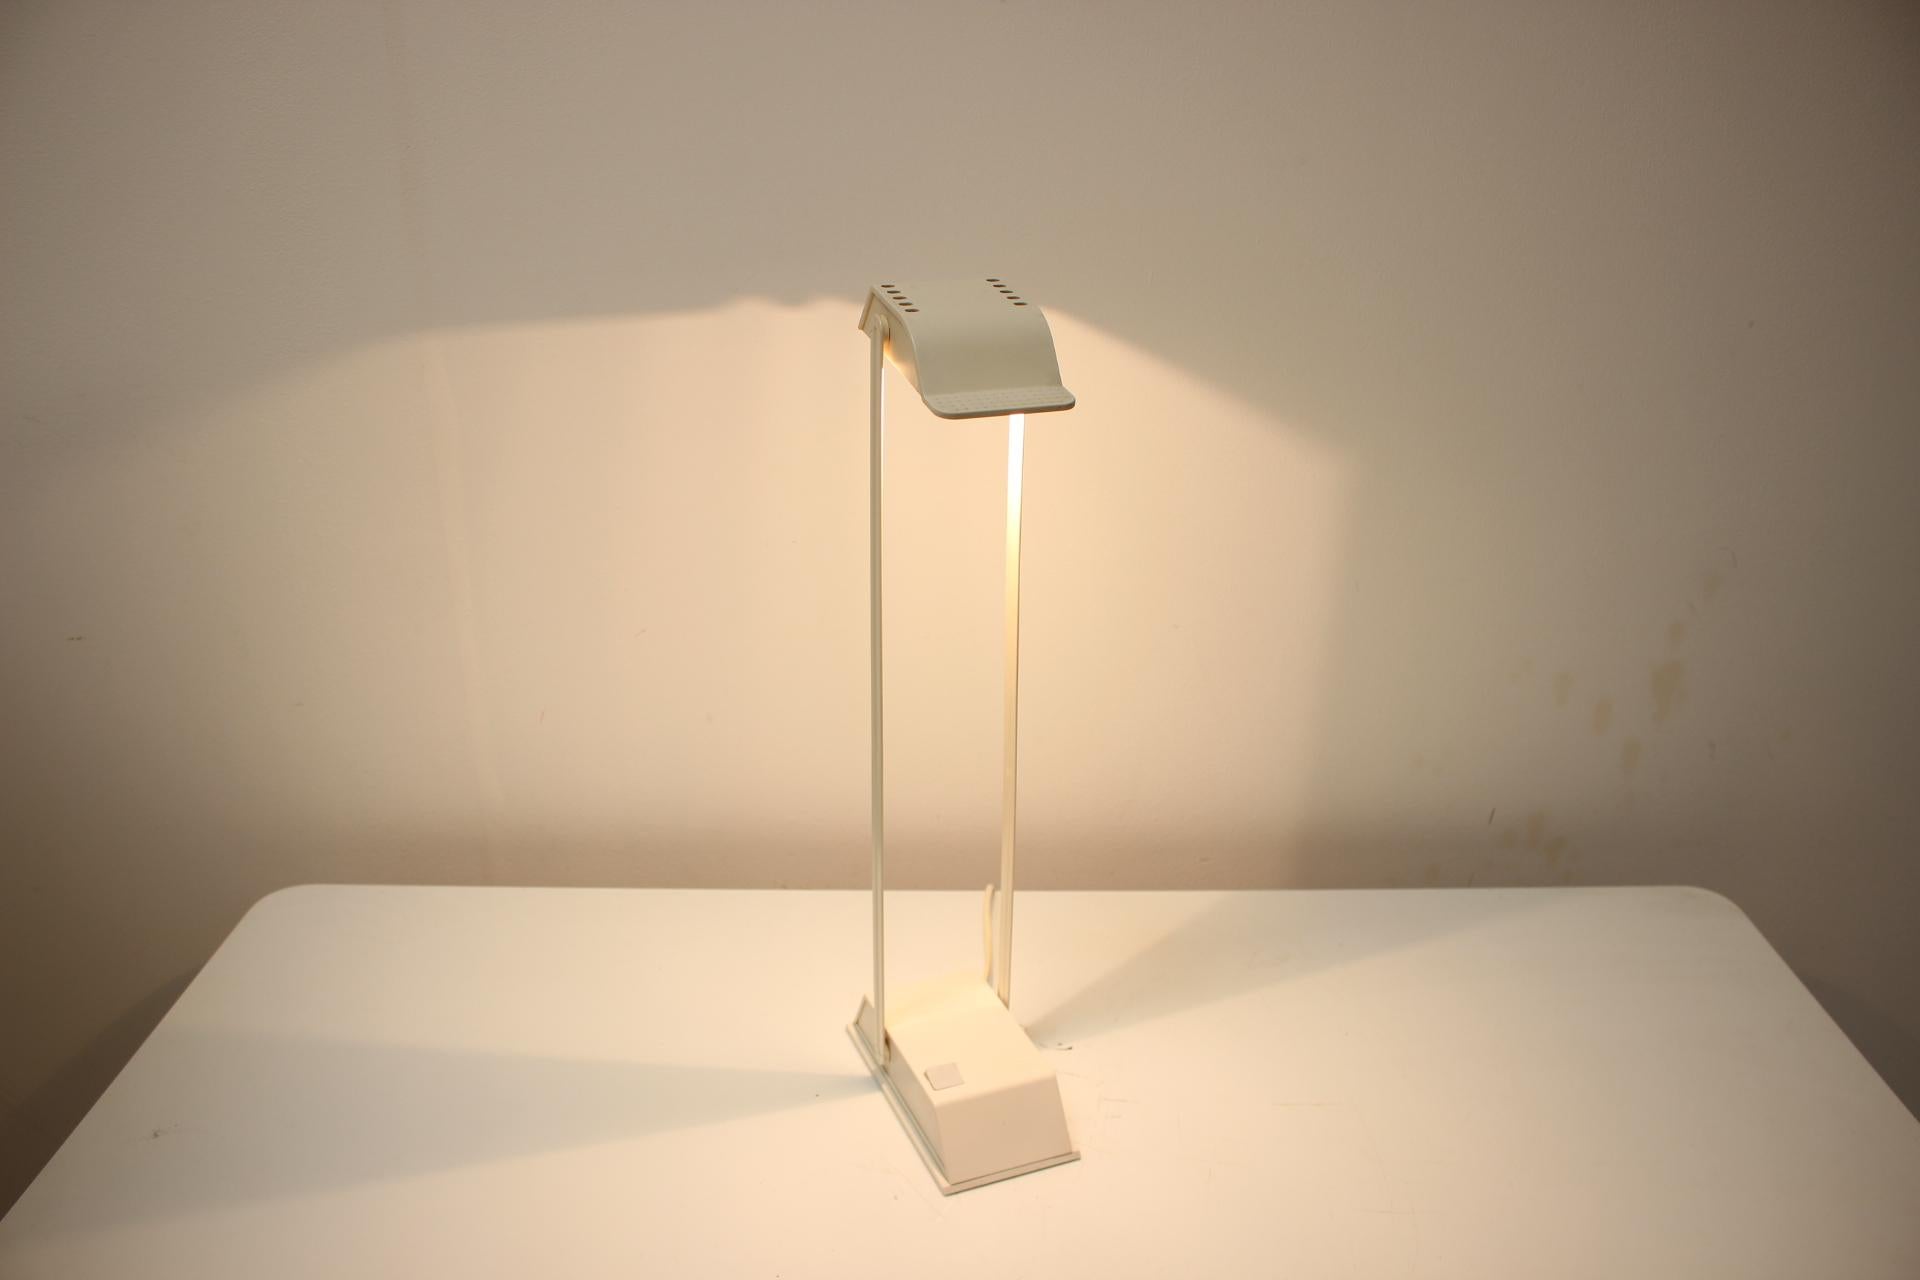 Metal Halostar 50 Table or Wall Lamp by Osram, Germany 1980s For Sale